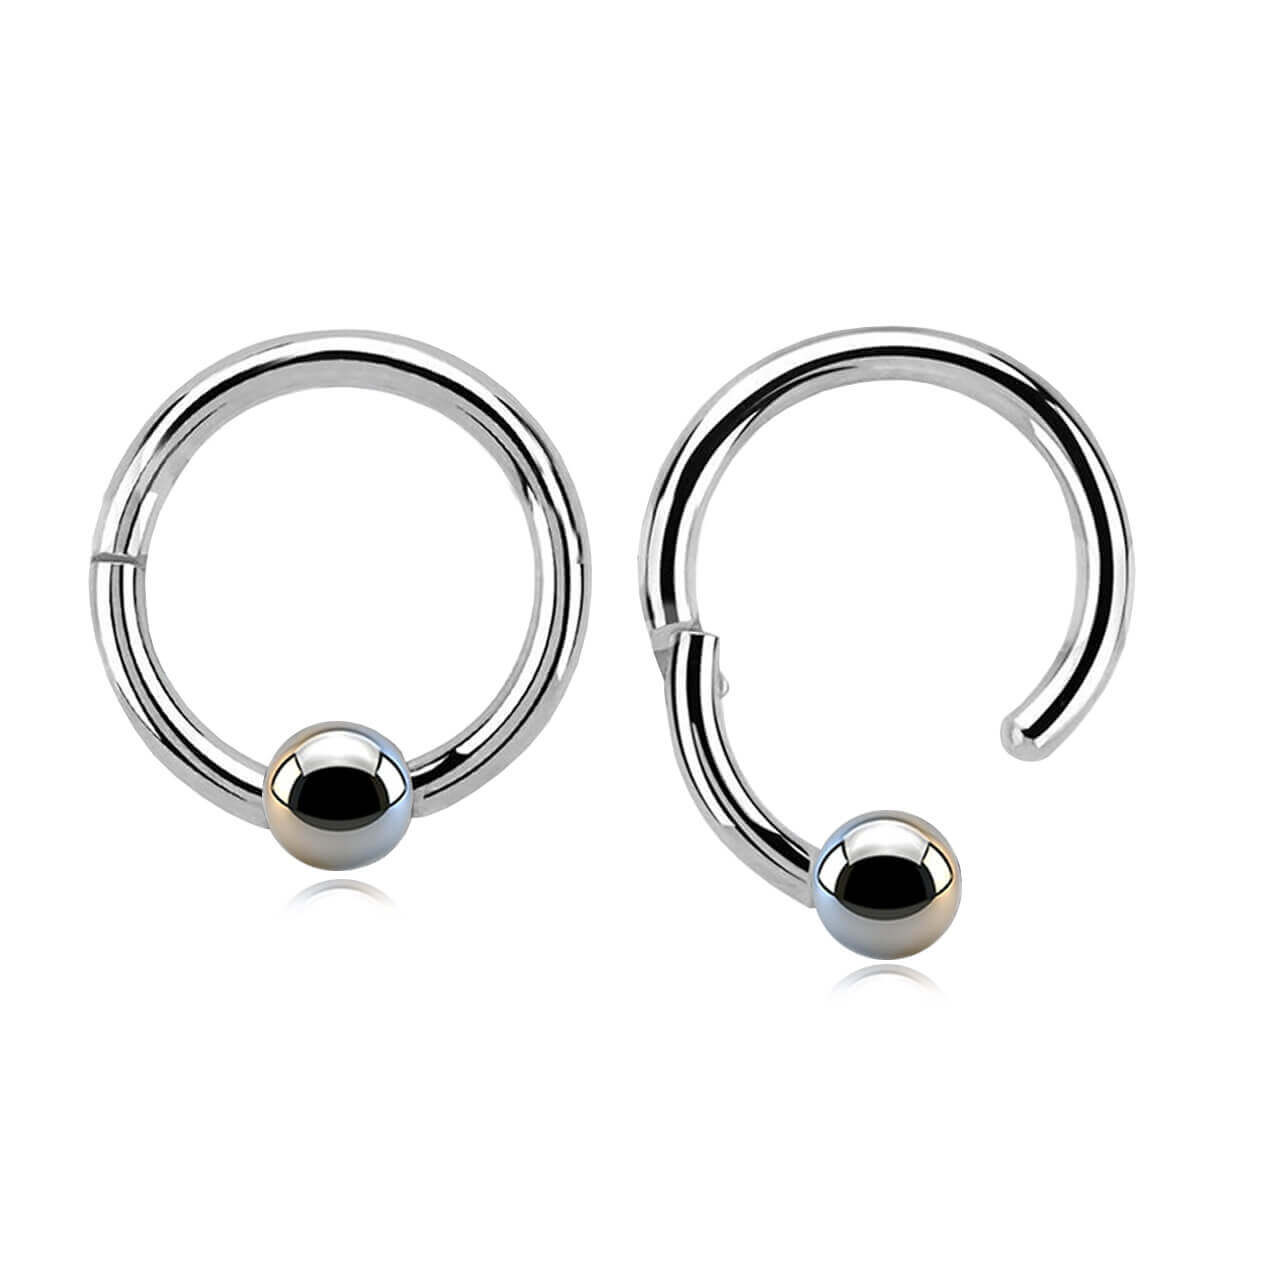 SBC12B3H Wholesale Lot of 10 surgical steel hinged ball closure rings, Thickness 1.2mm, Ball size 3mm